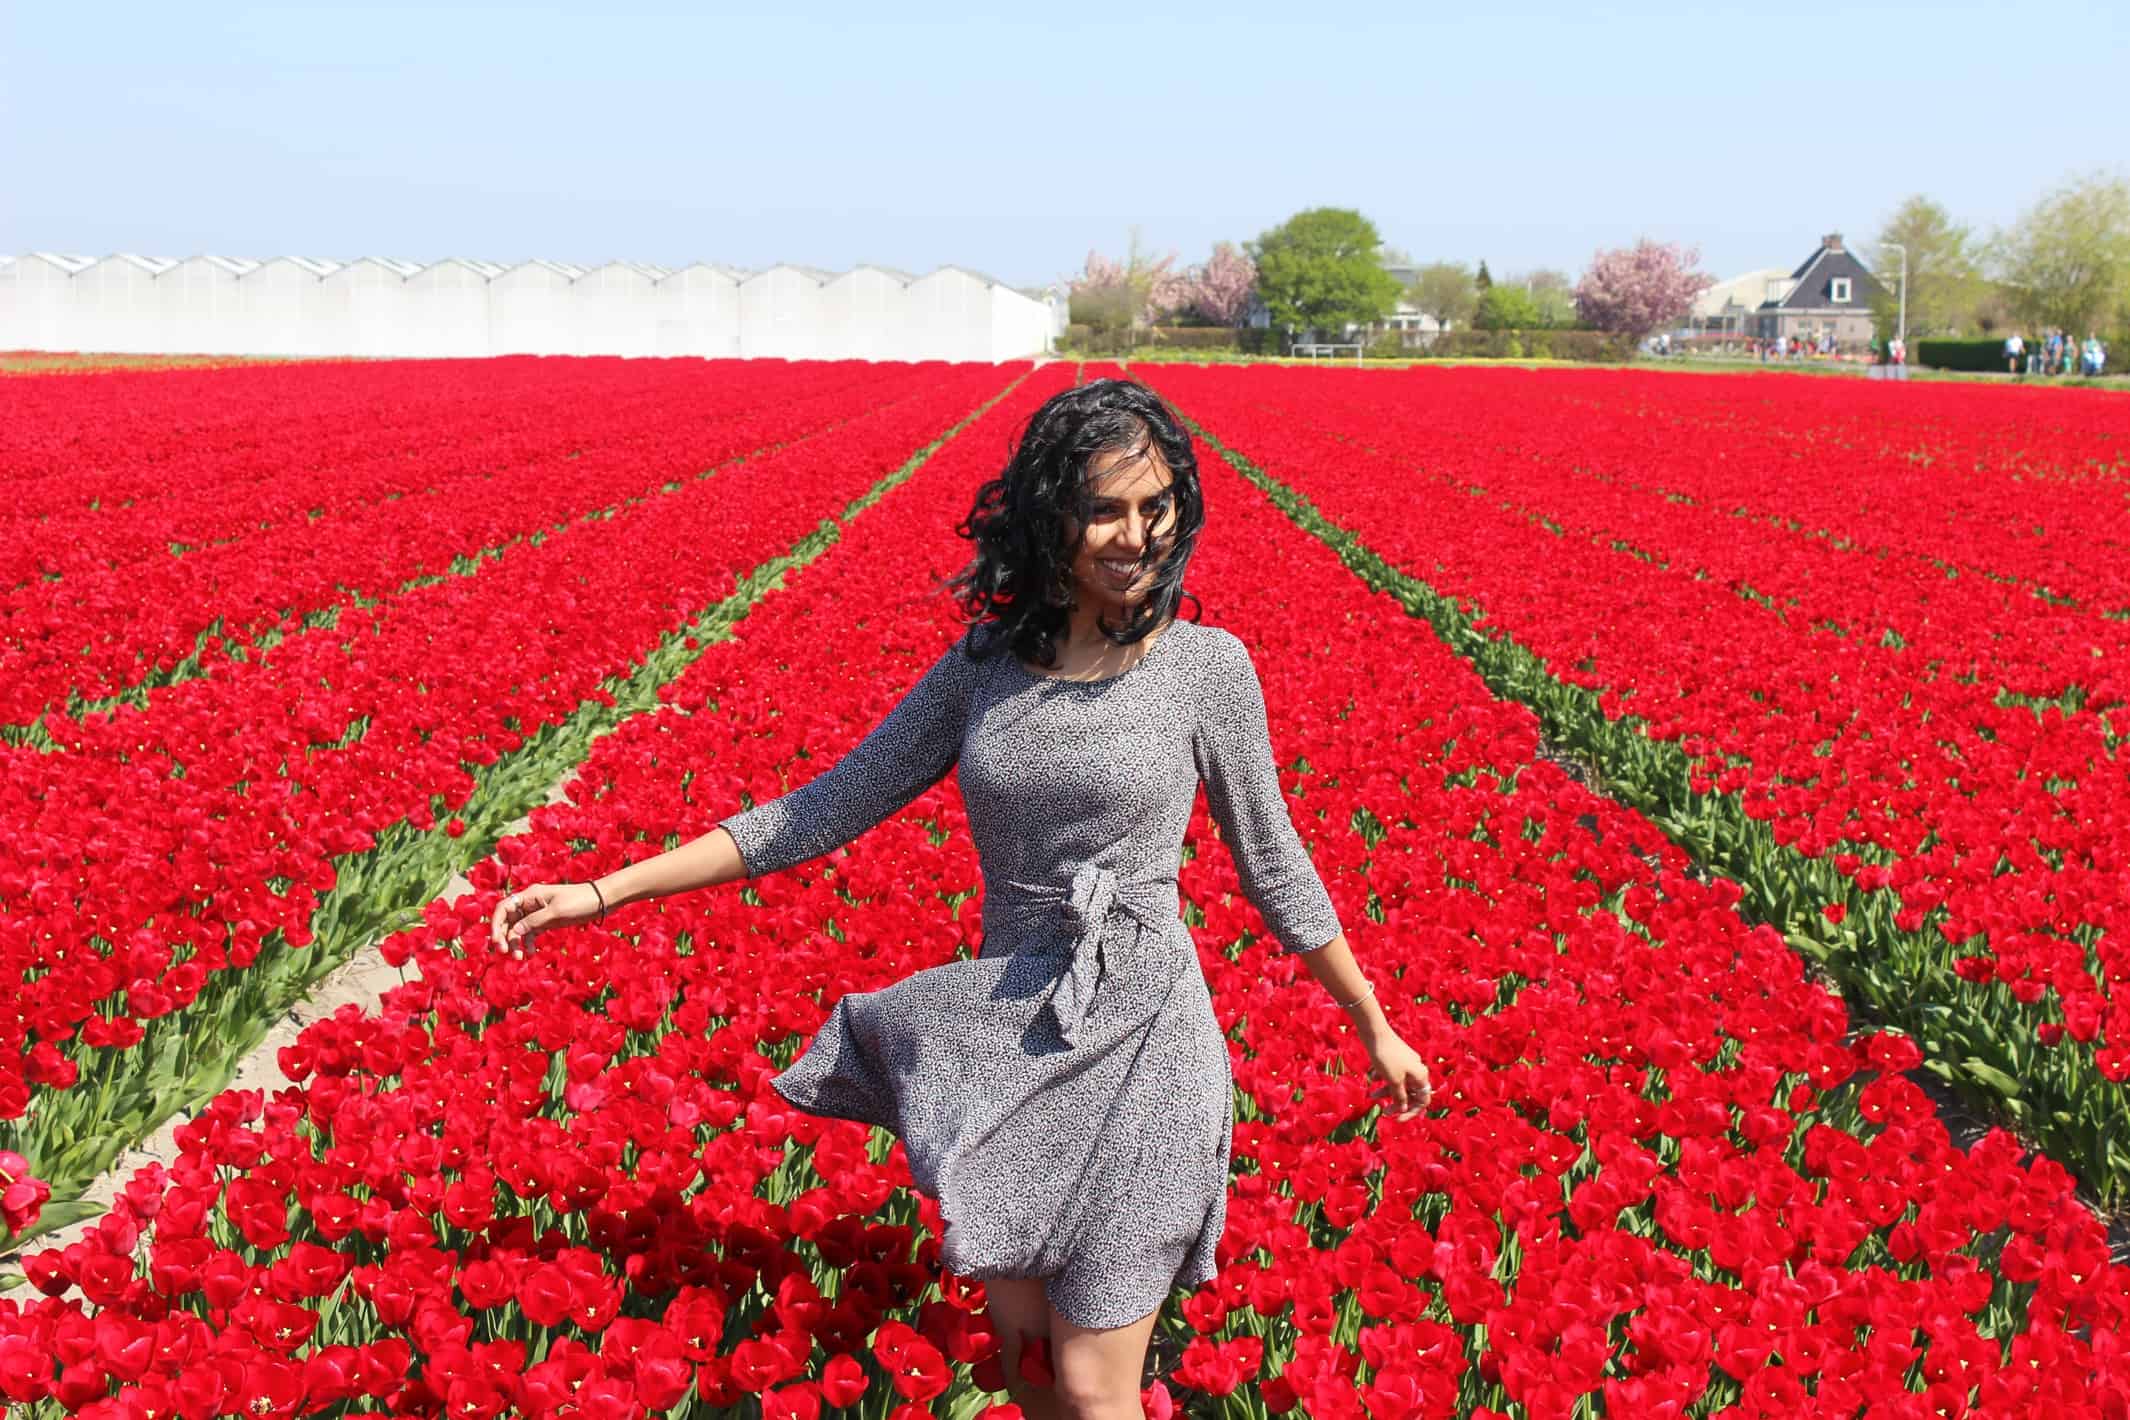 A Guide to Visiting the Flower Fields near Keukenhof, Netherlands - Tulips and more! - image IMG_4037 on https://www.curlsandbeautydiary.com